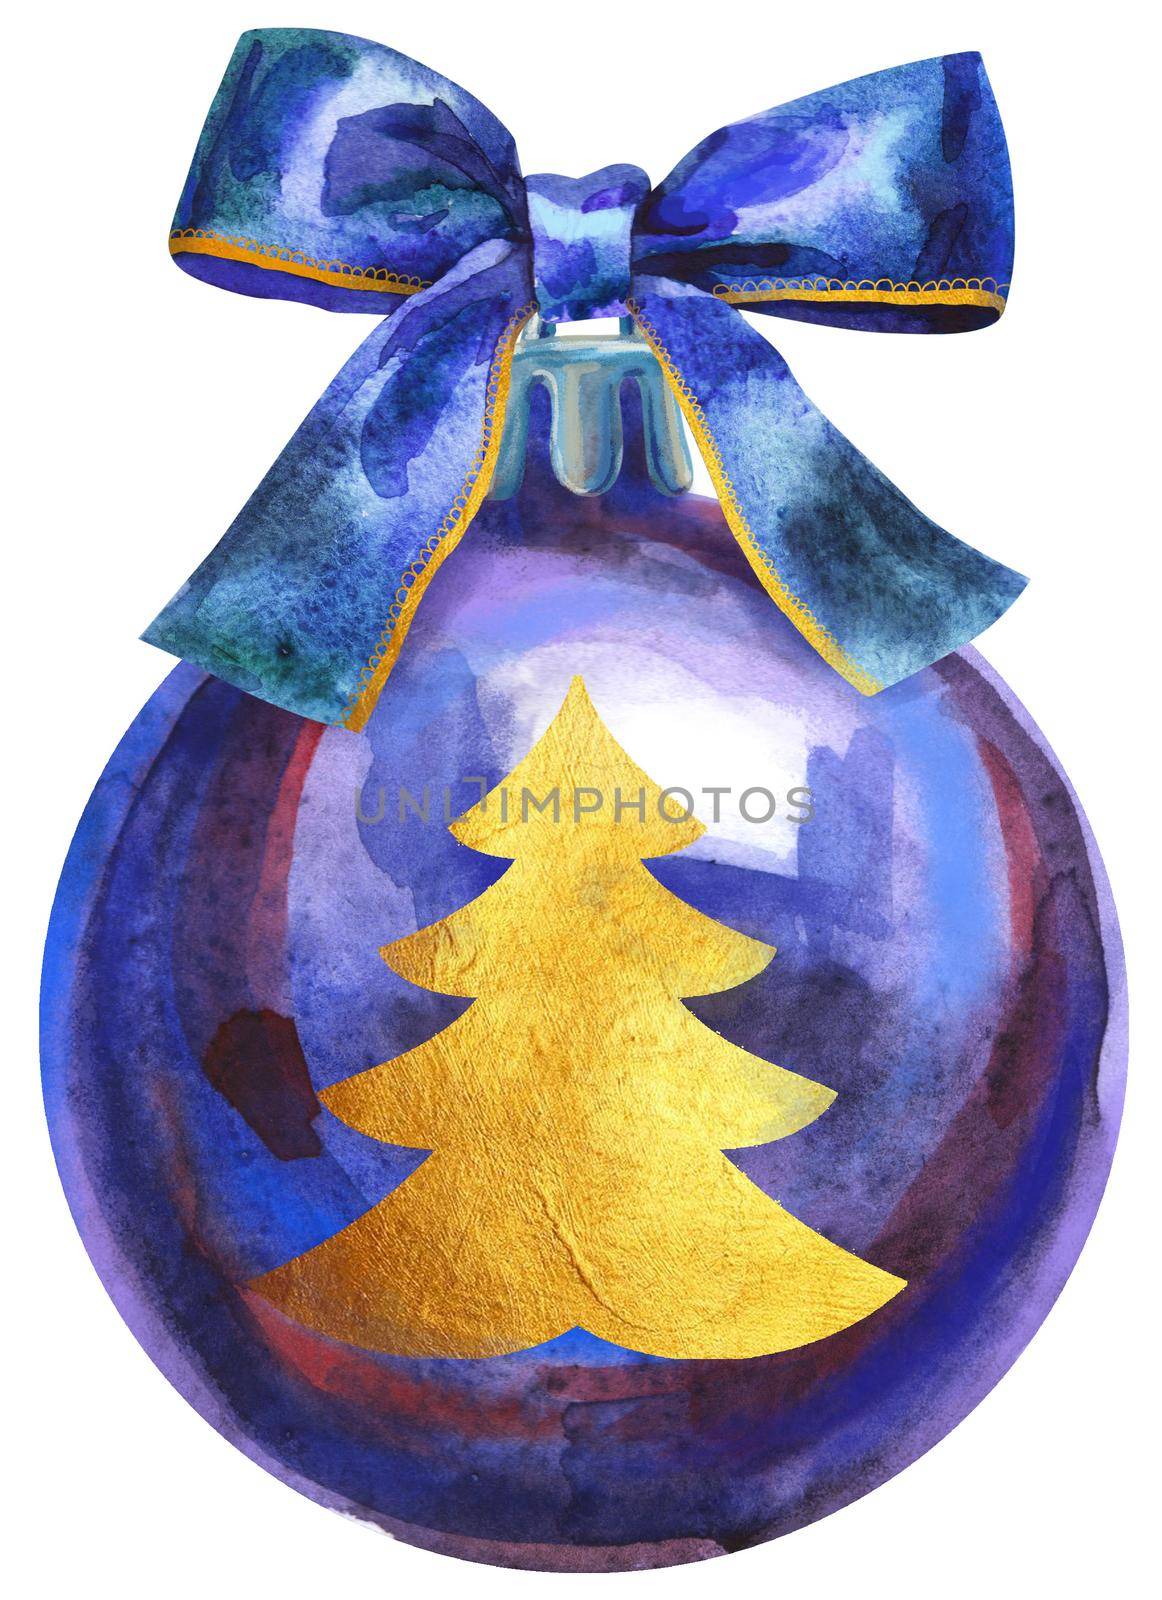 Watercolor Christmas violet ball with bow isolated on a white background.